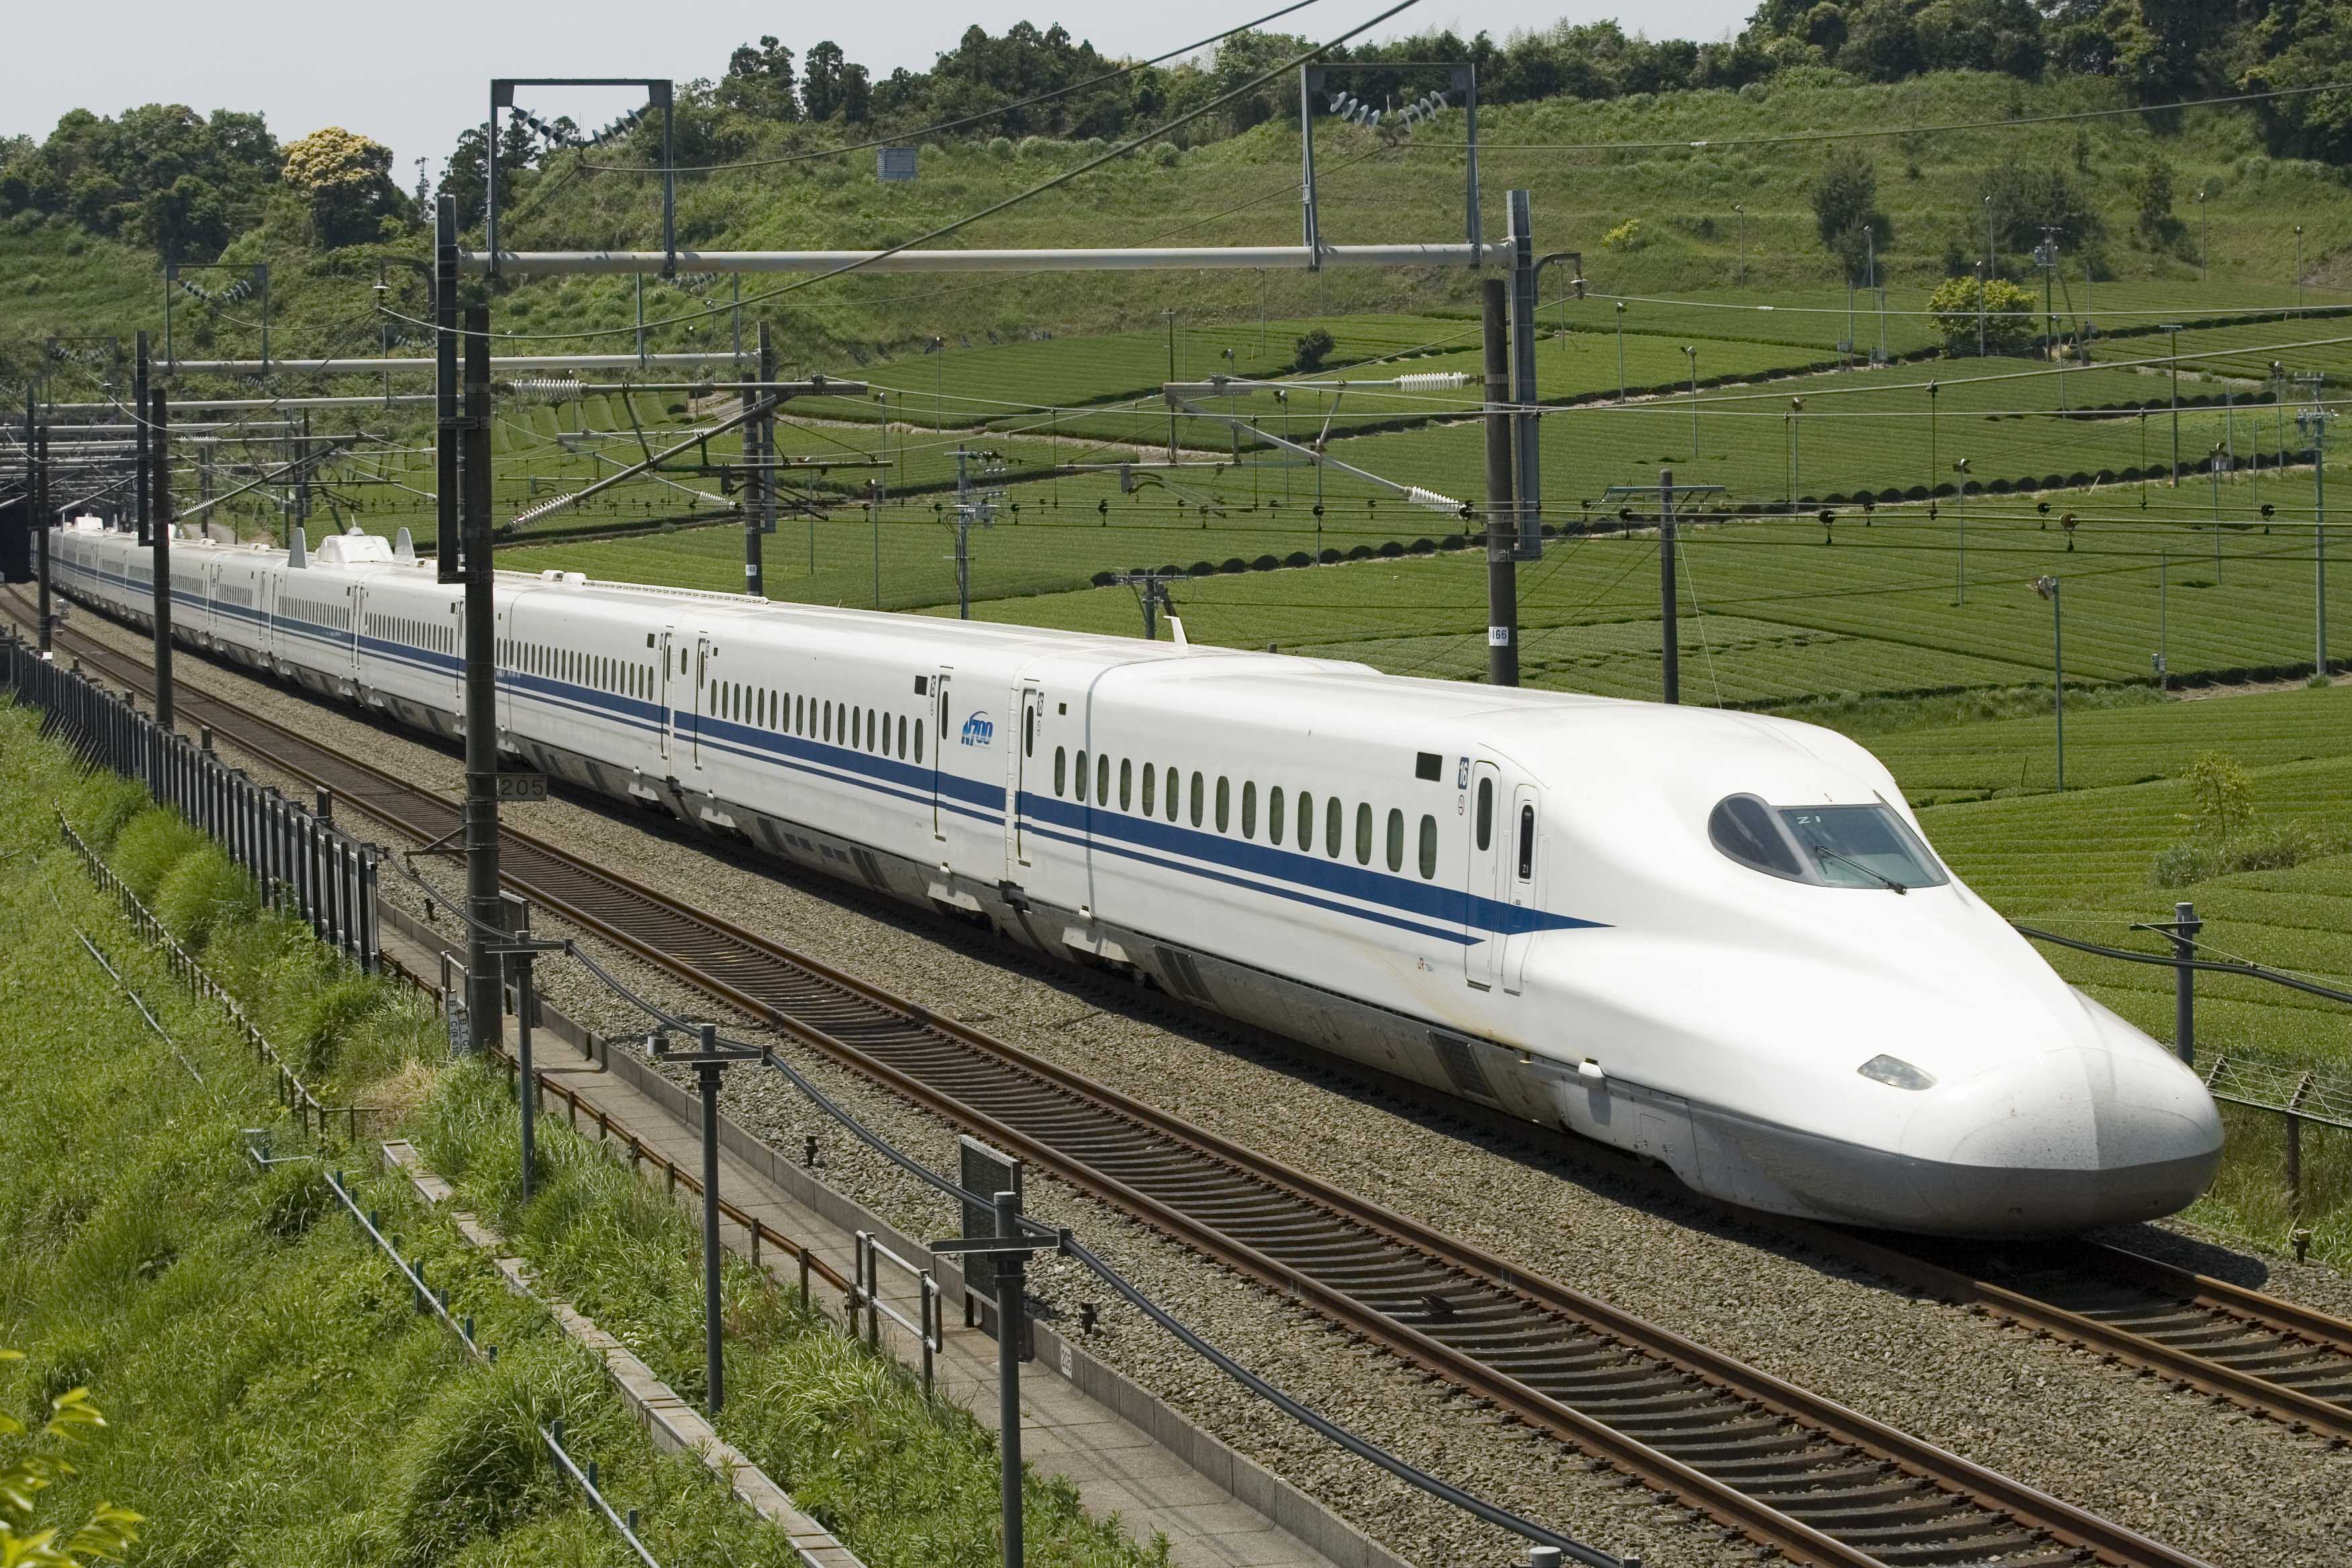 Bullet train to speed into Texas | The Baylor Lariat